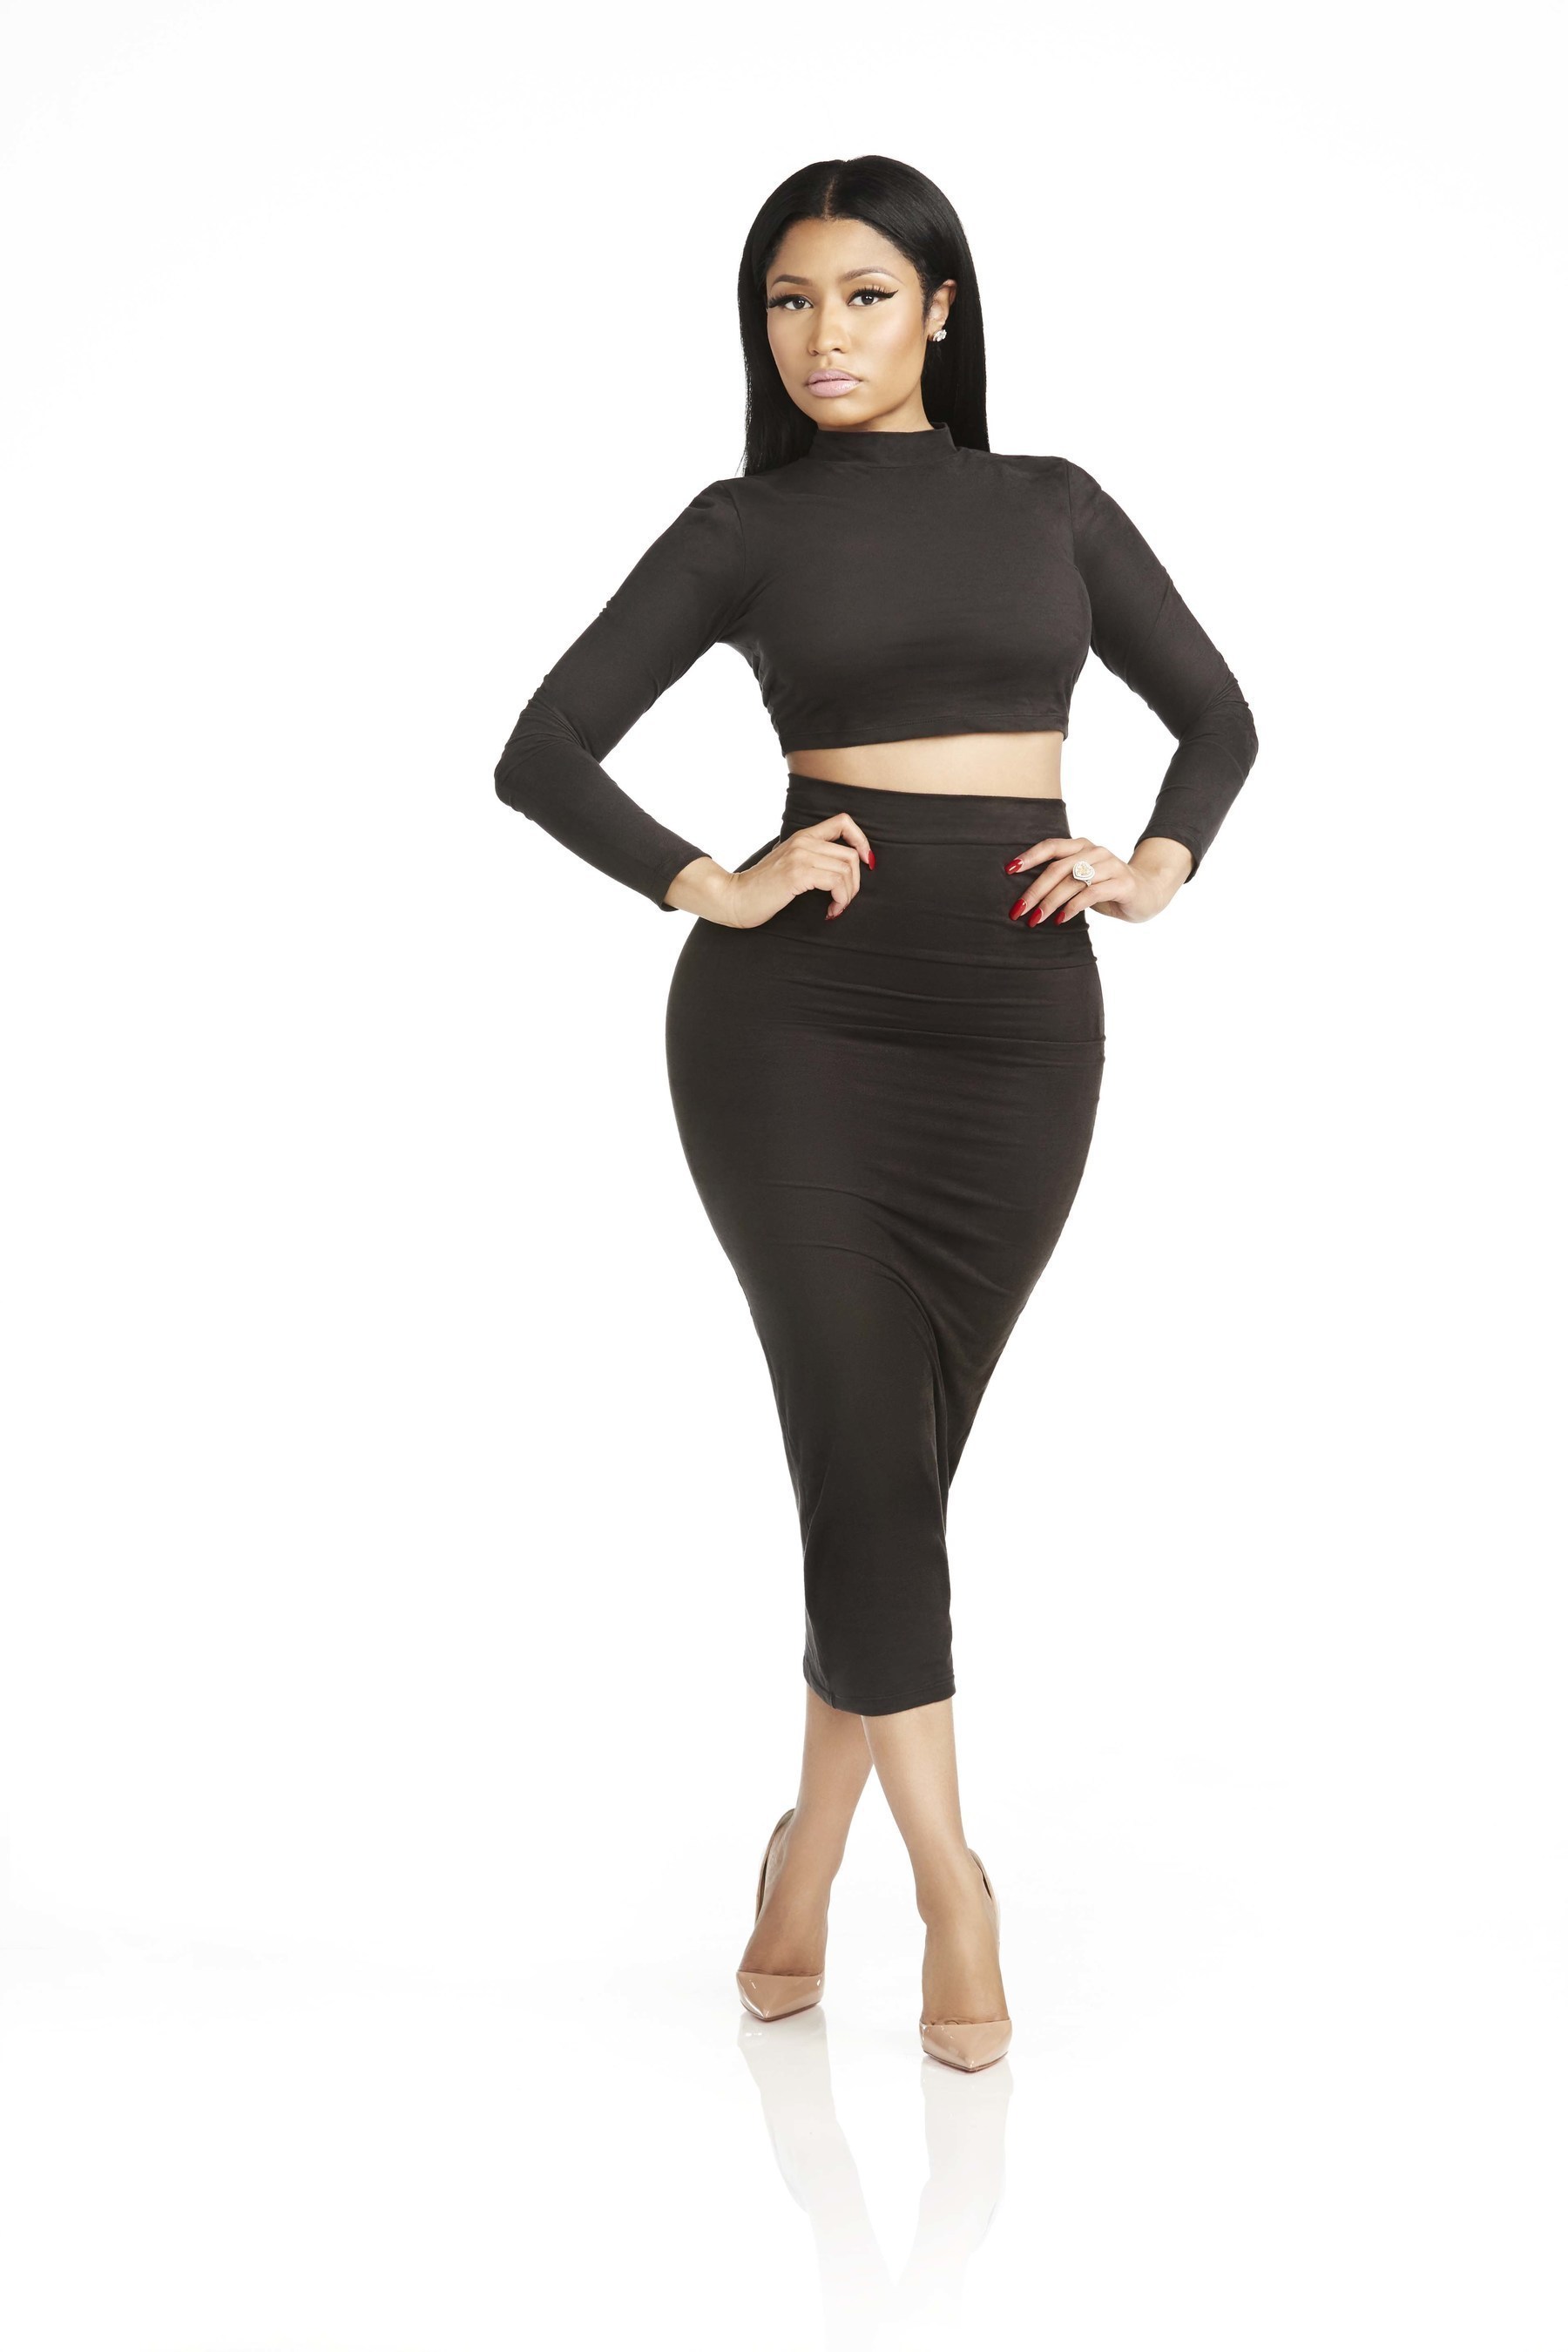 Nicki Minaj Turns Up Cyber Monday With Exclusive Holiday Capsule Collection  At Kmart